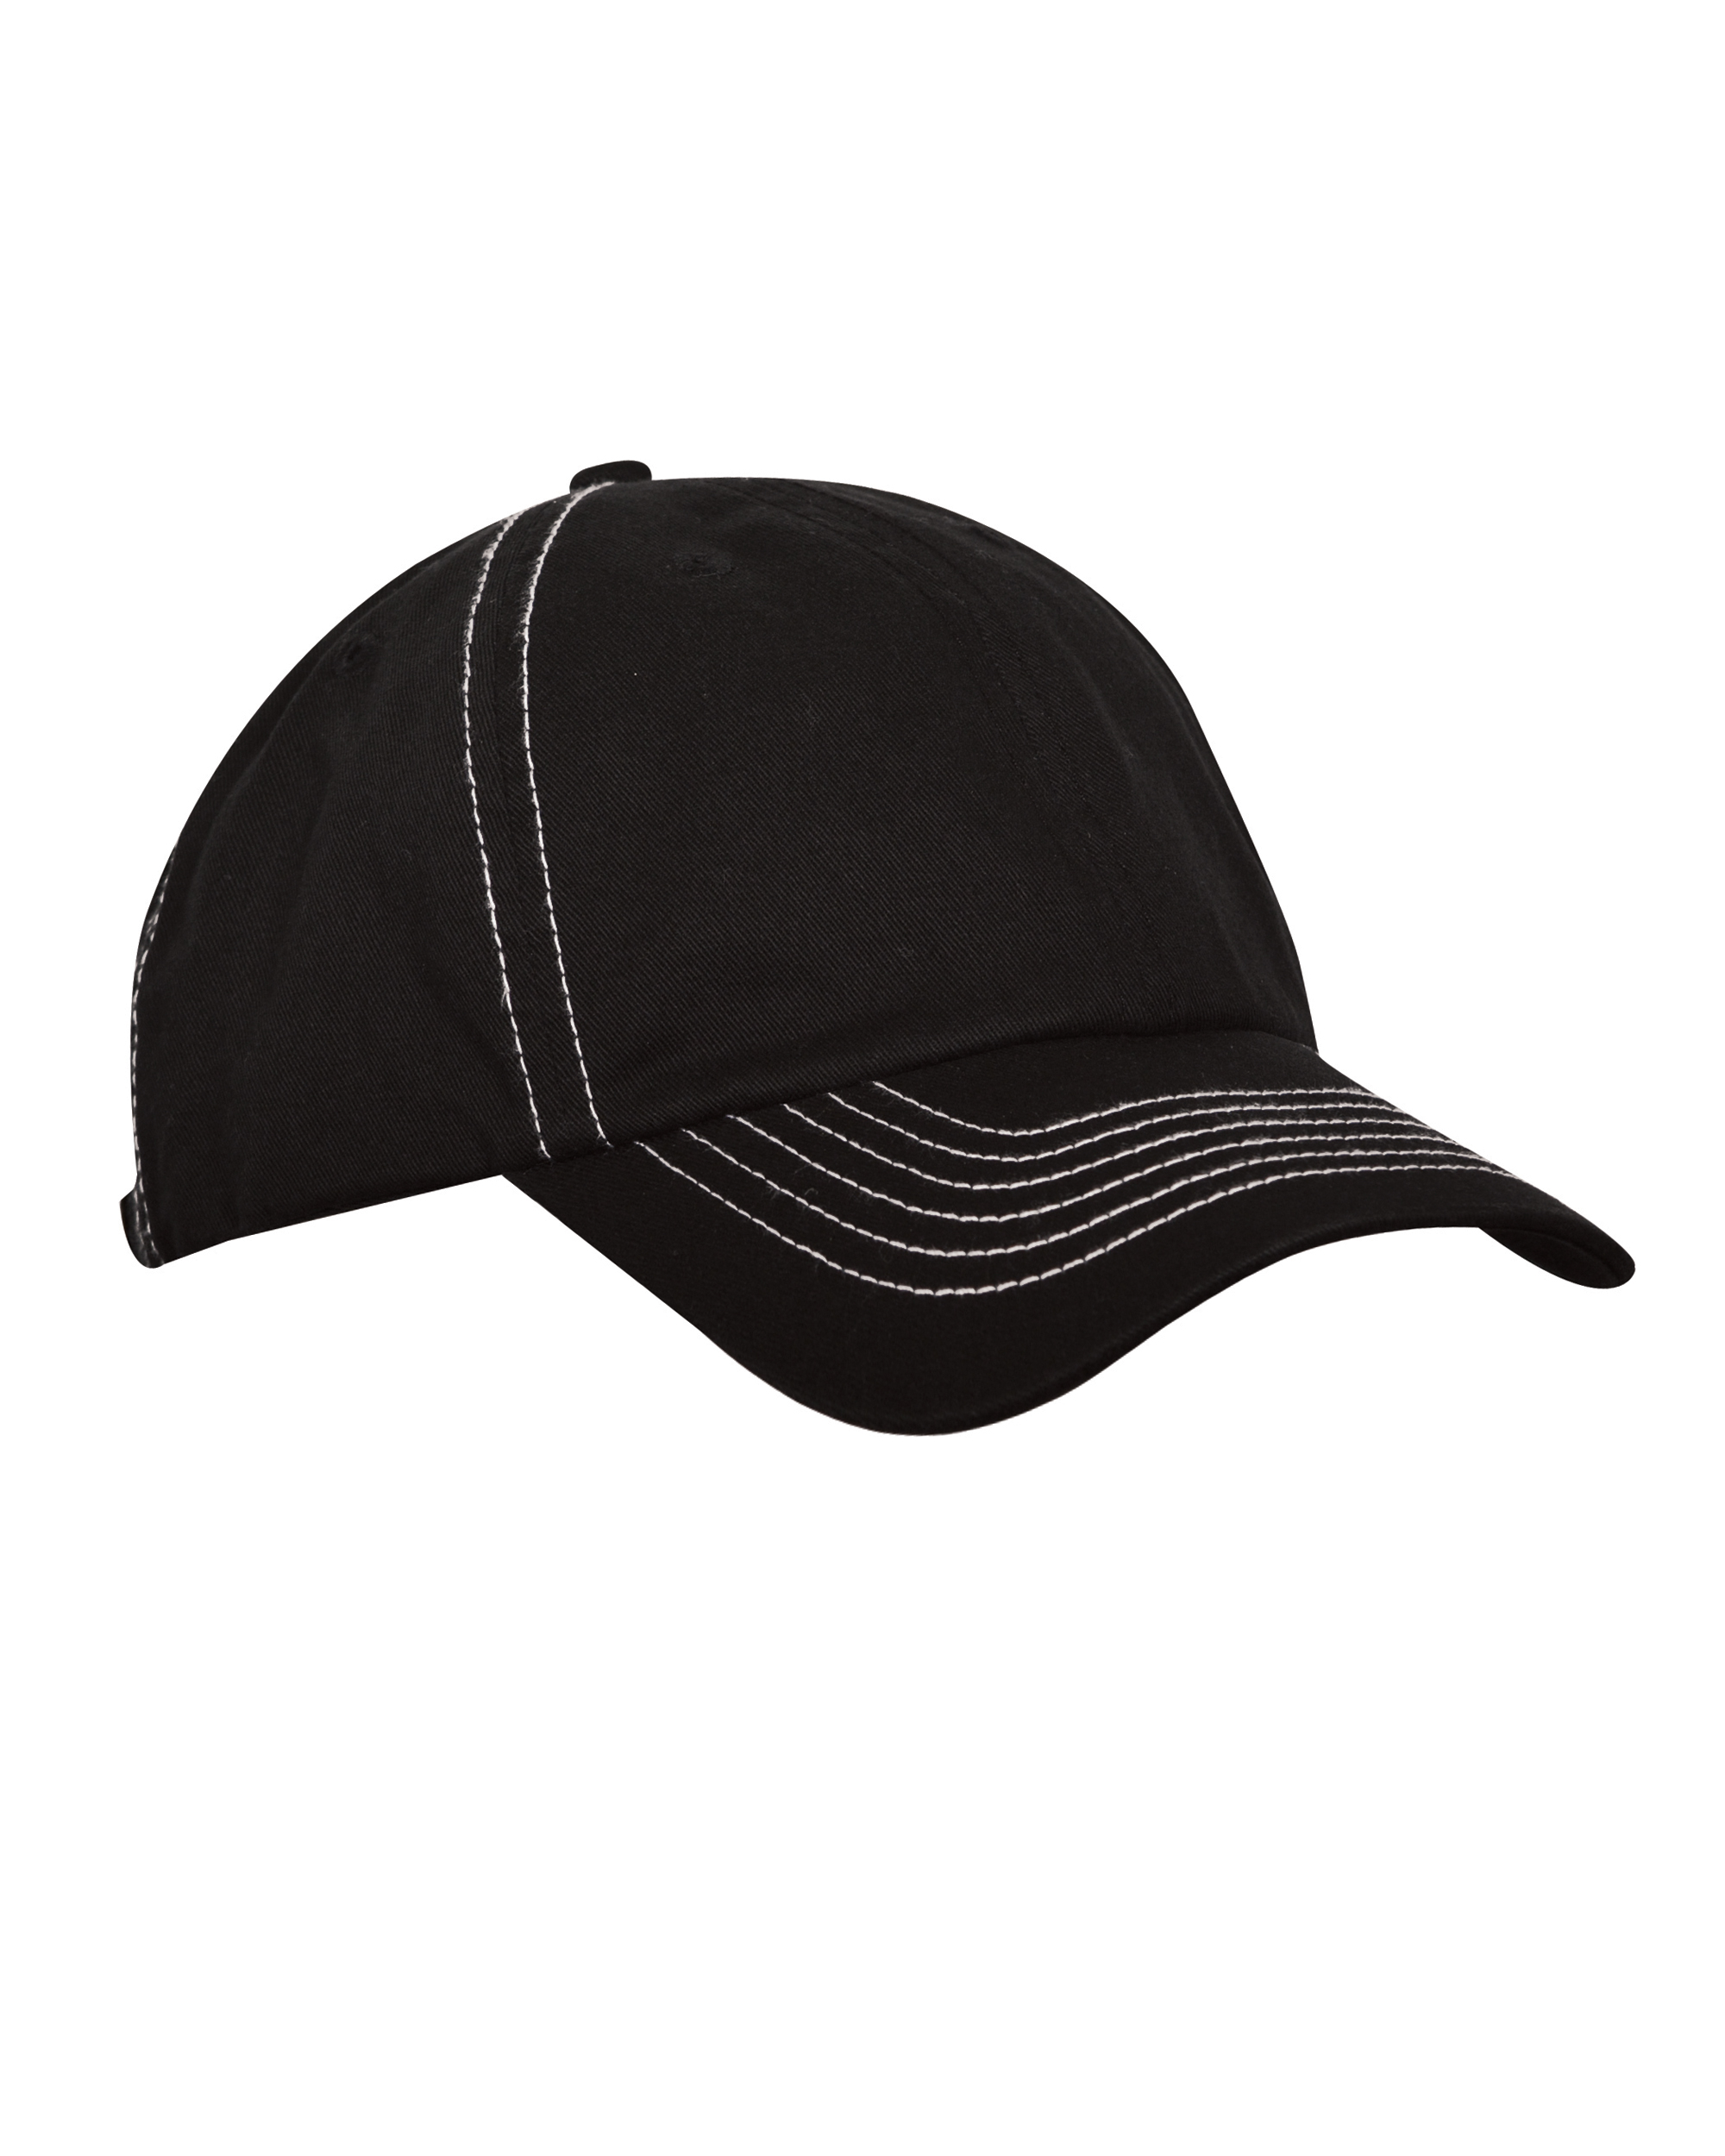 EastWest Embroidery 8360 Contrast Stitch Brushed Twill Cap